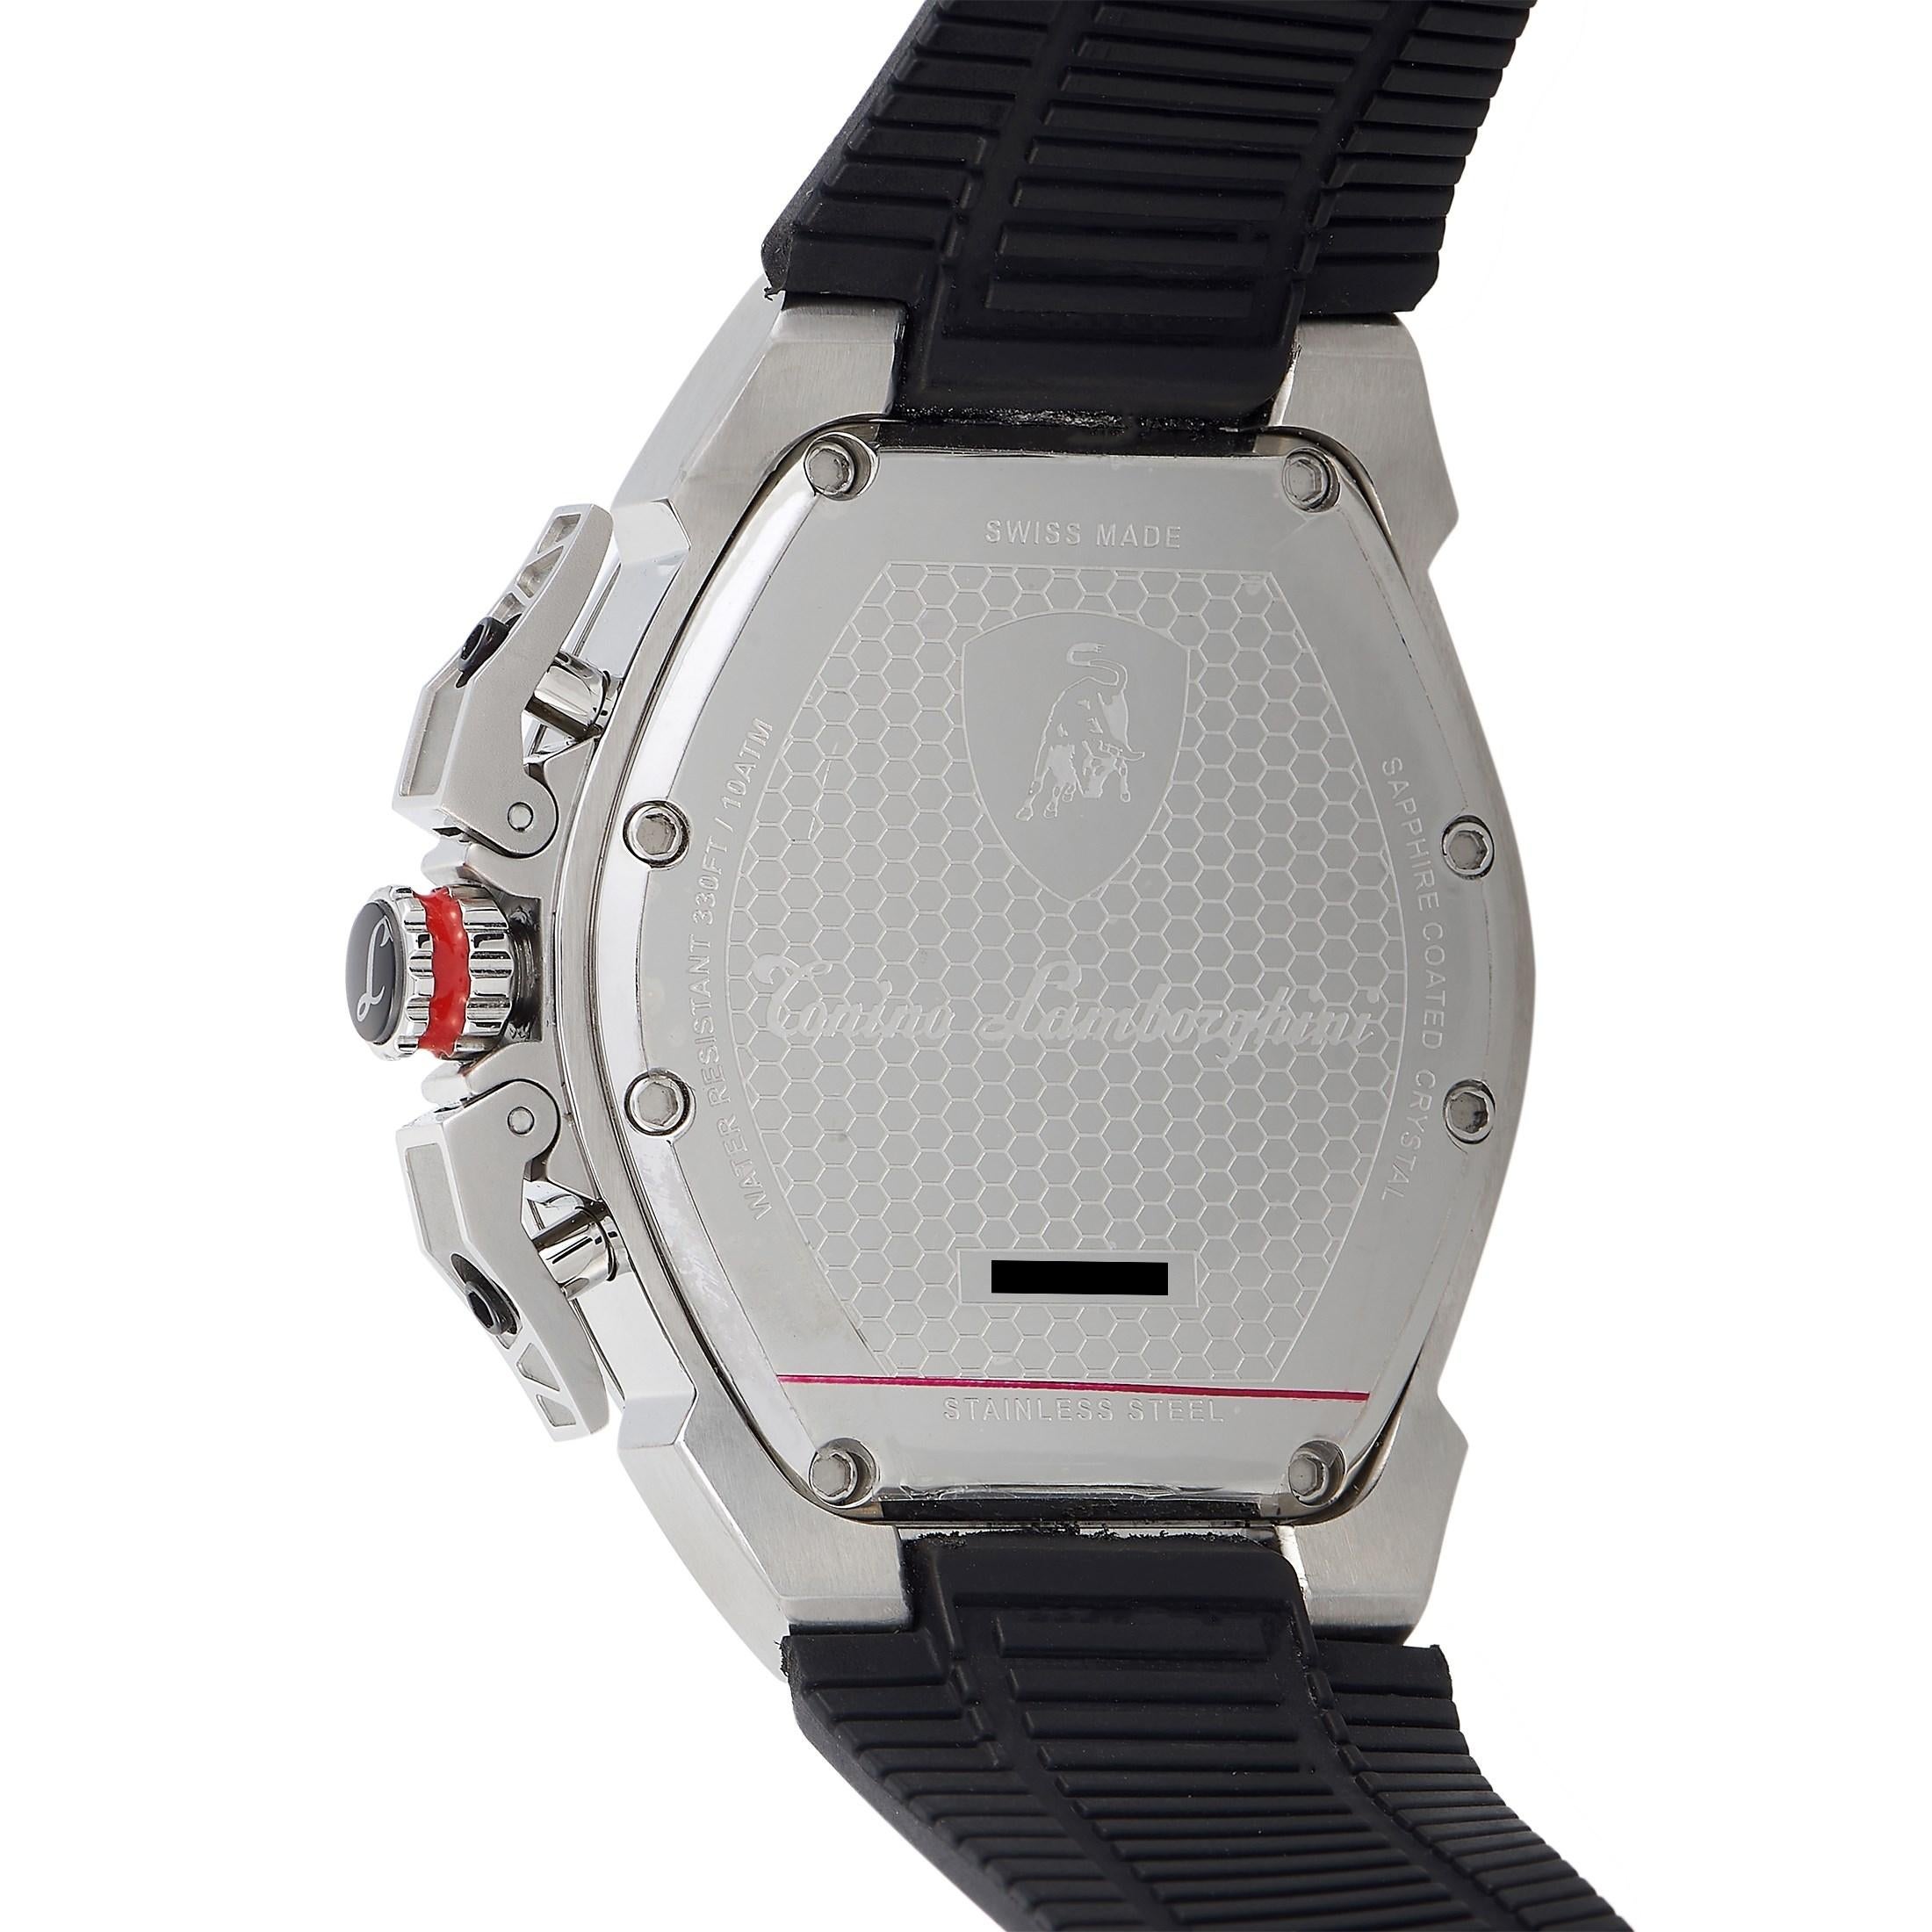 This Tonino Lamborghini Chronograph Stainless Steel Watch, reference number GT302SP, features a stainless steel case presented on a stylish black rubber strap with deployment clasp bearing the Lamborghini logo. The Lamborghini logo is also displayed